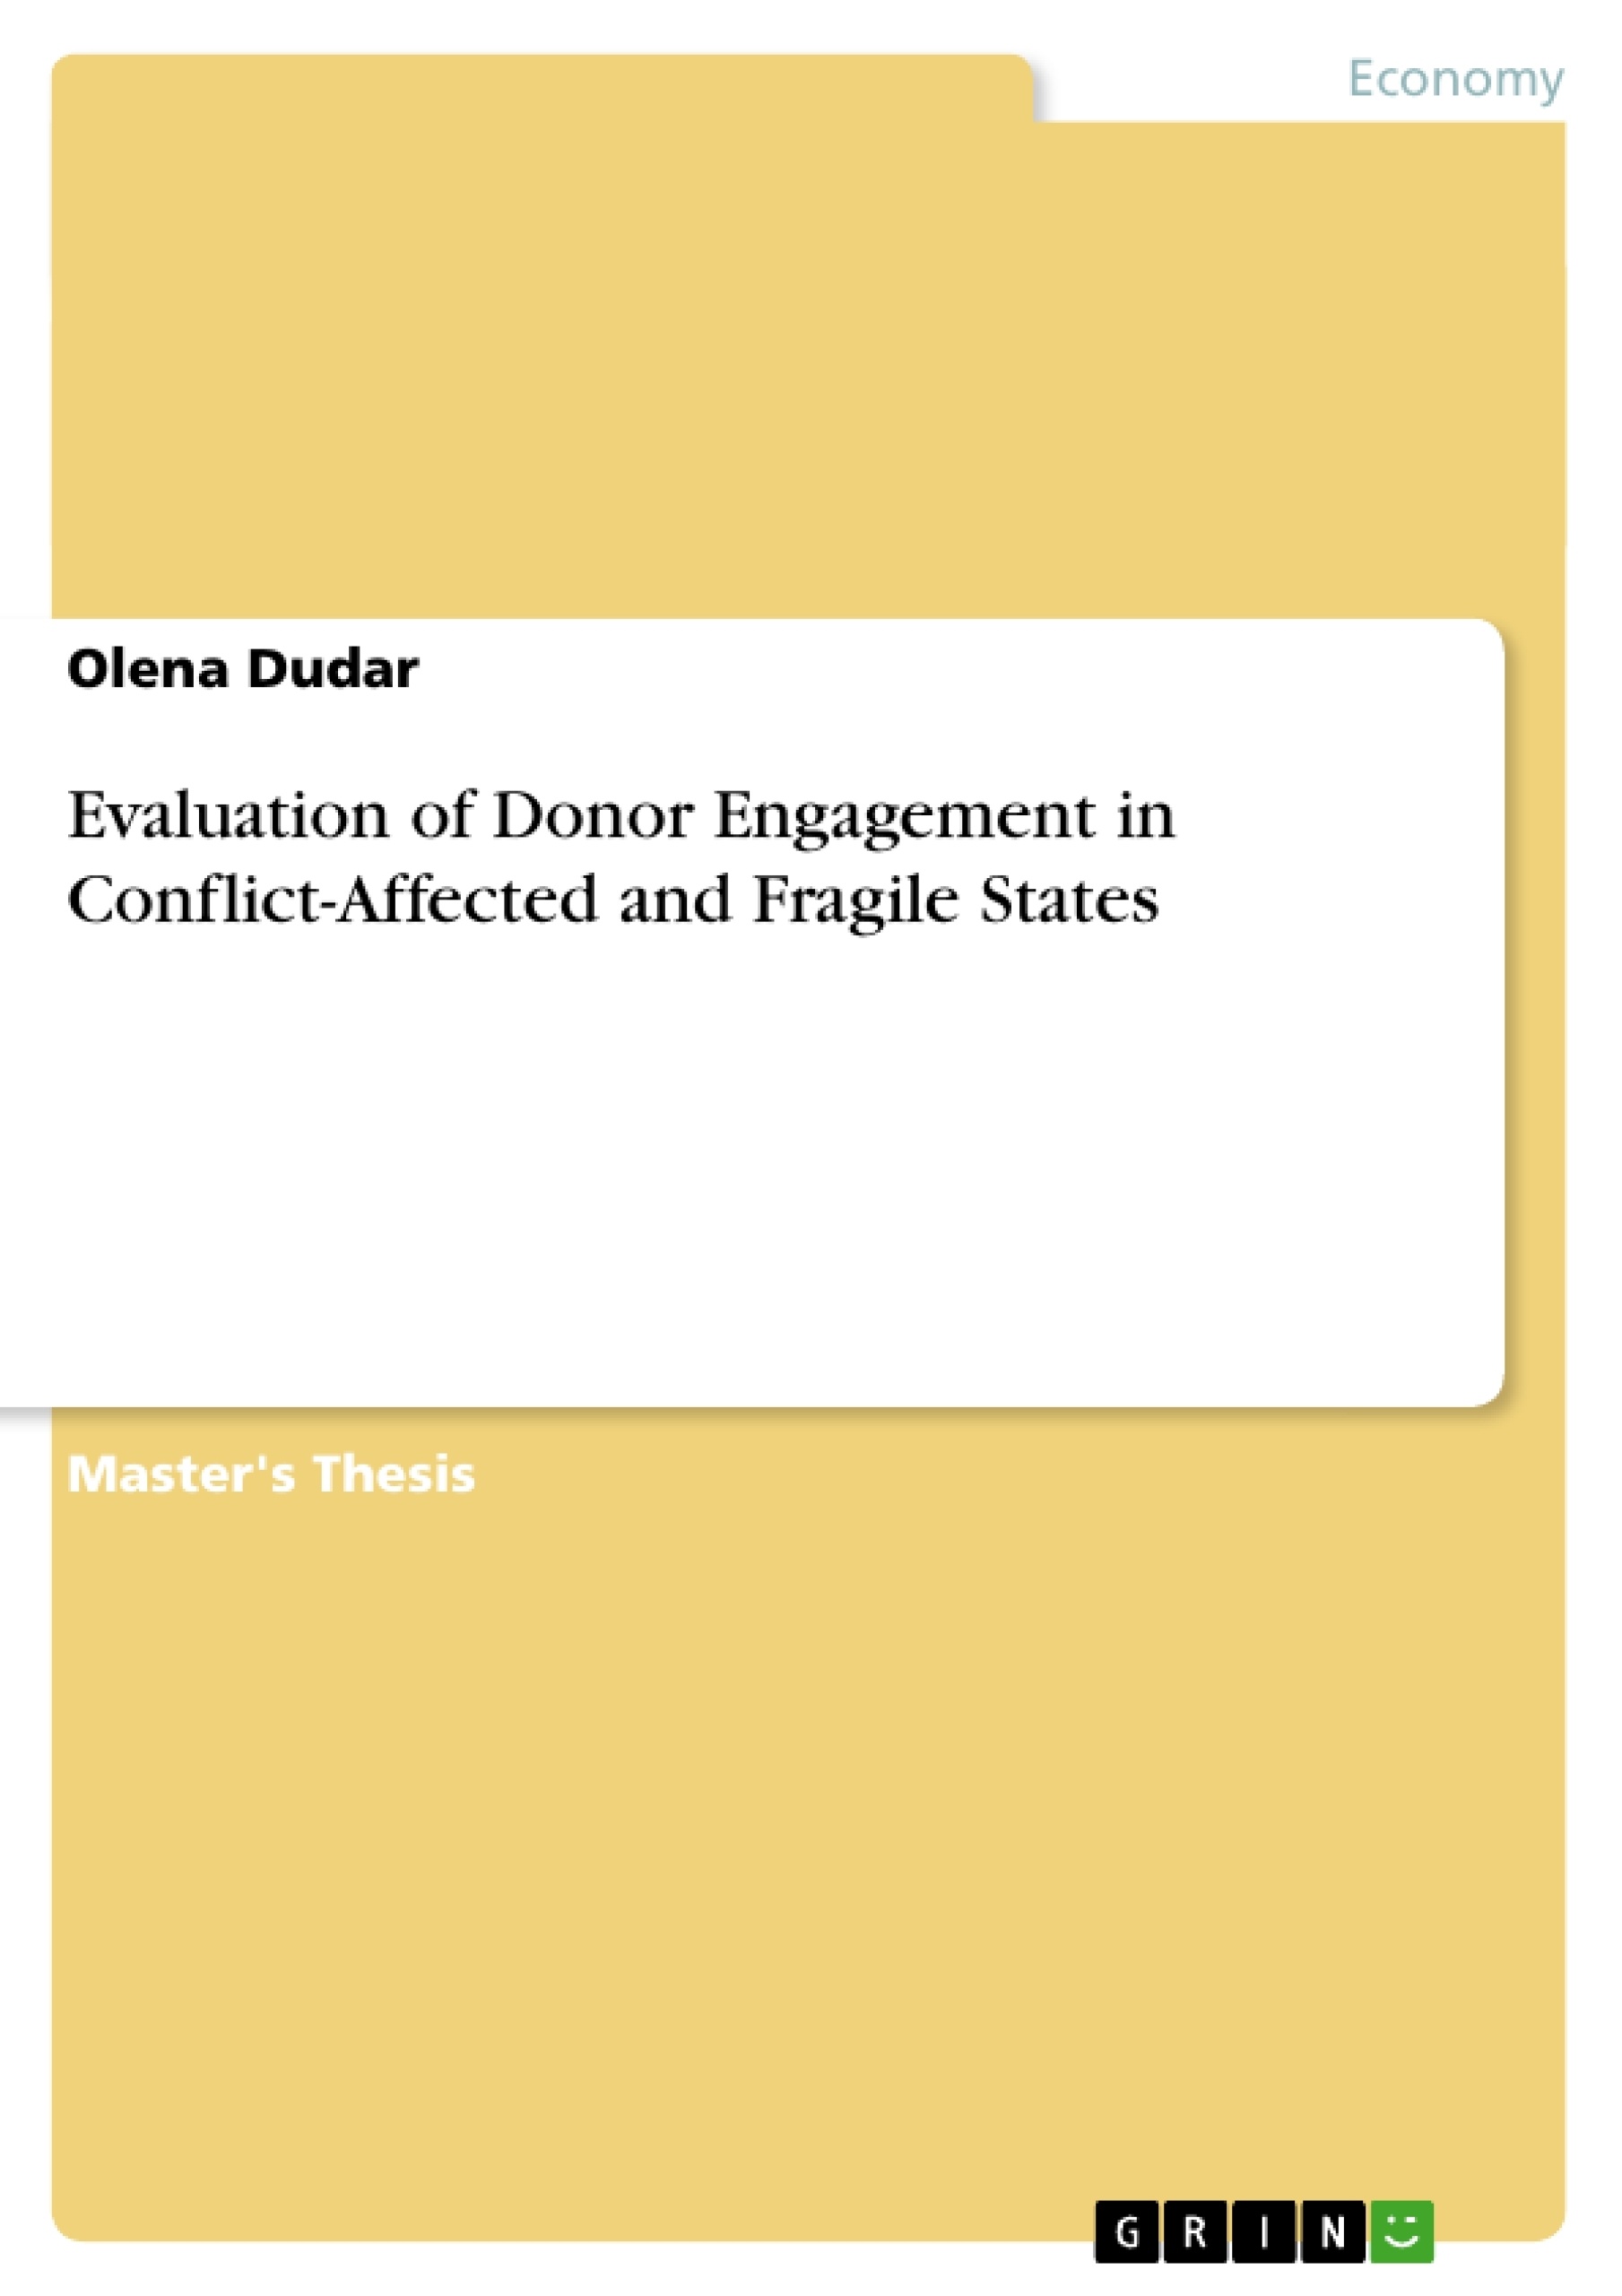 Title: Evaluation of Donor Engagement in Conflict-Affected and Fragile States